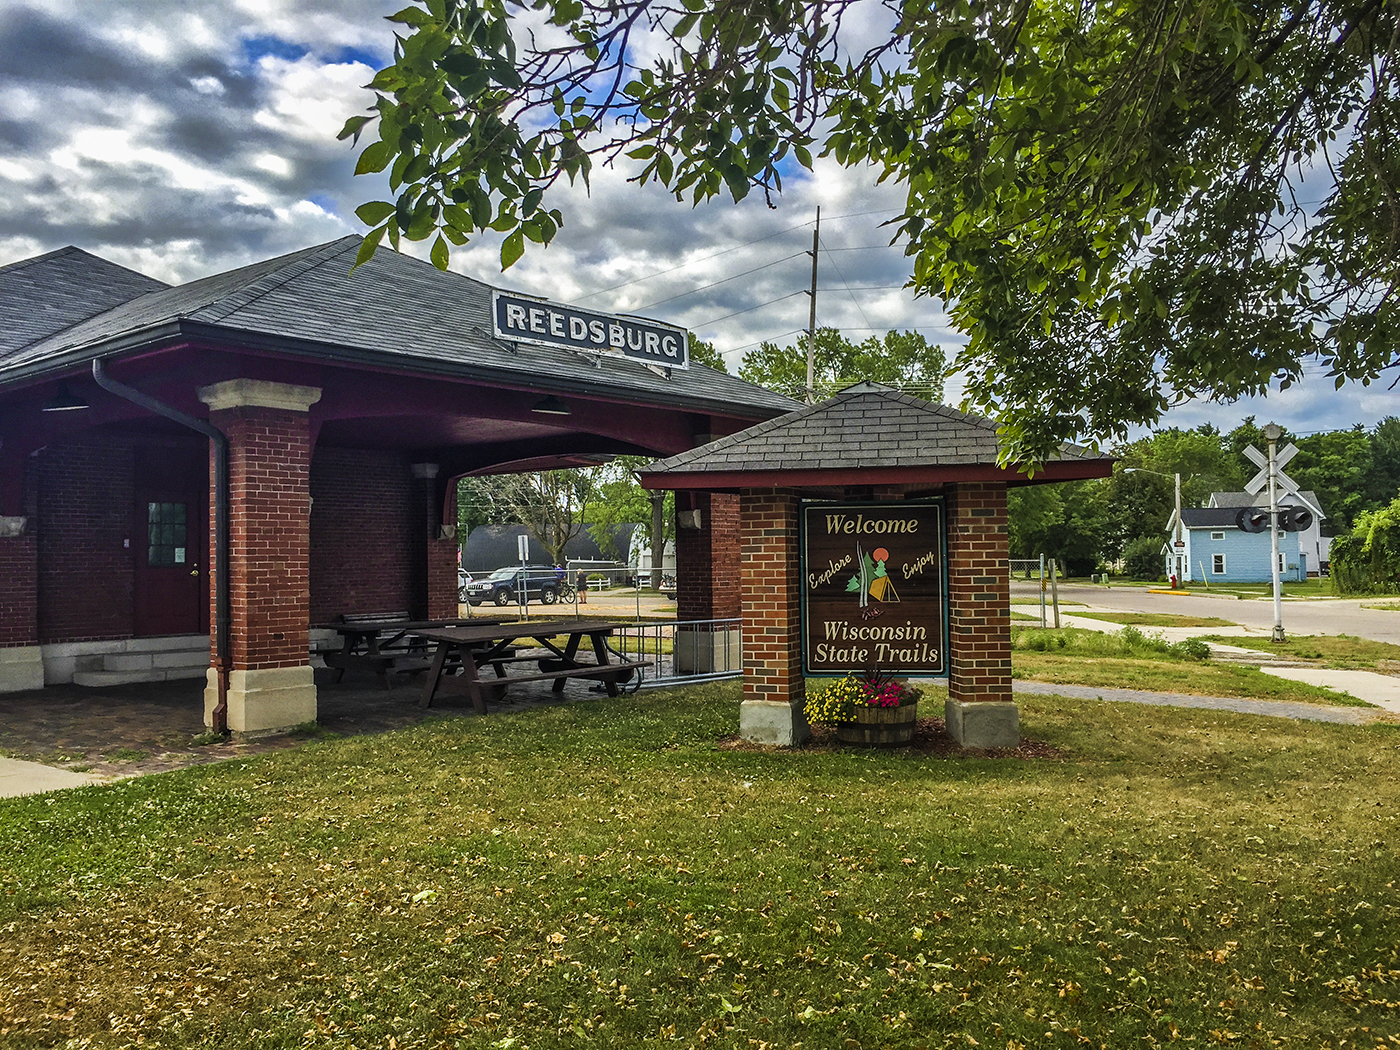 Reedsburg Depot on the 400 State Trail